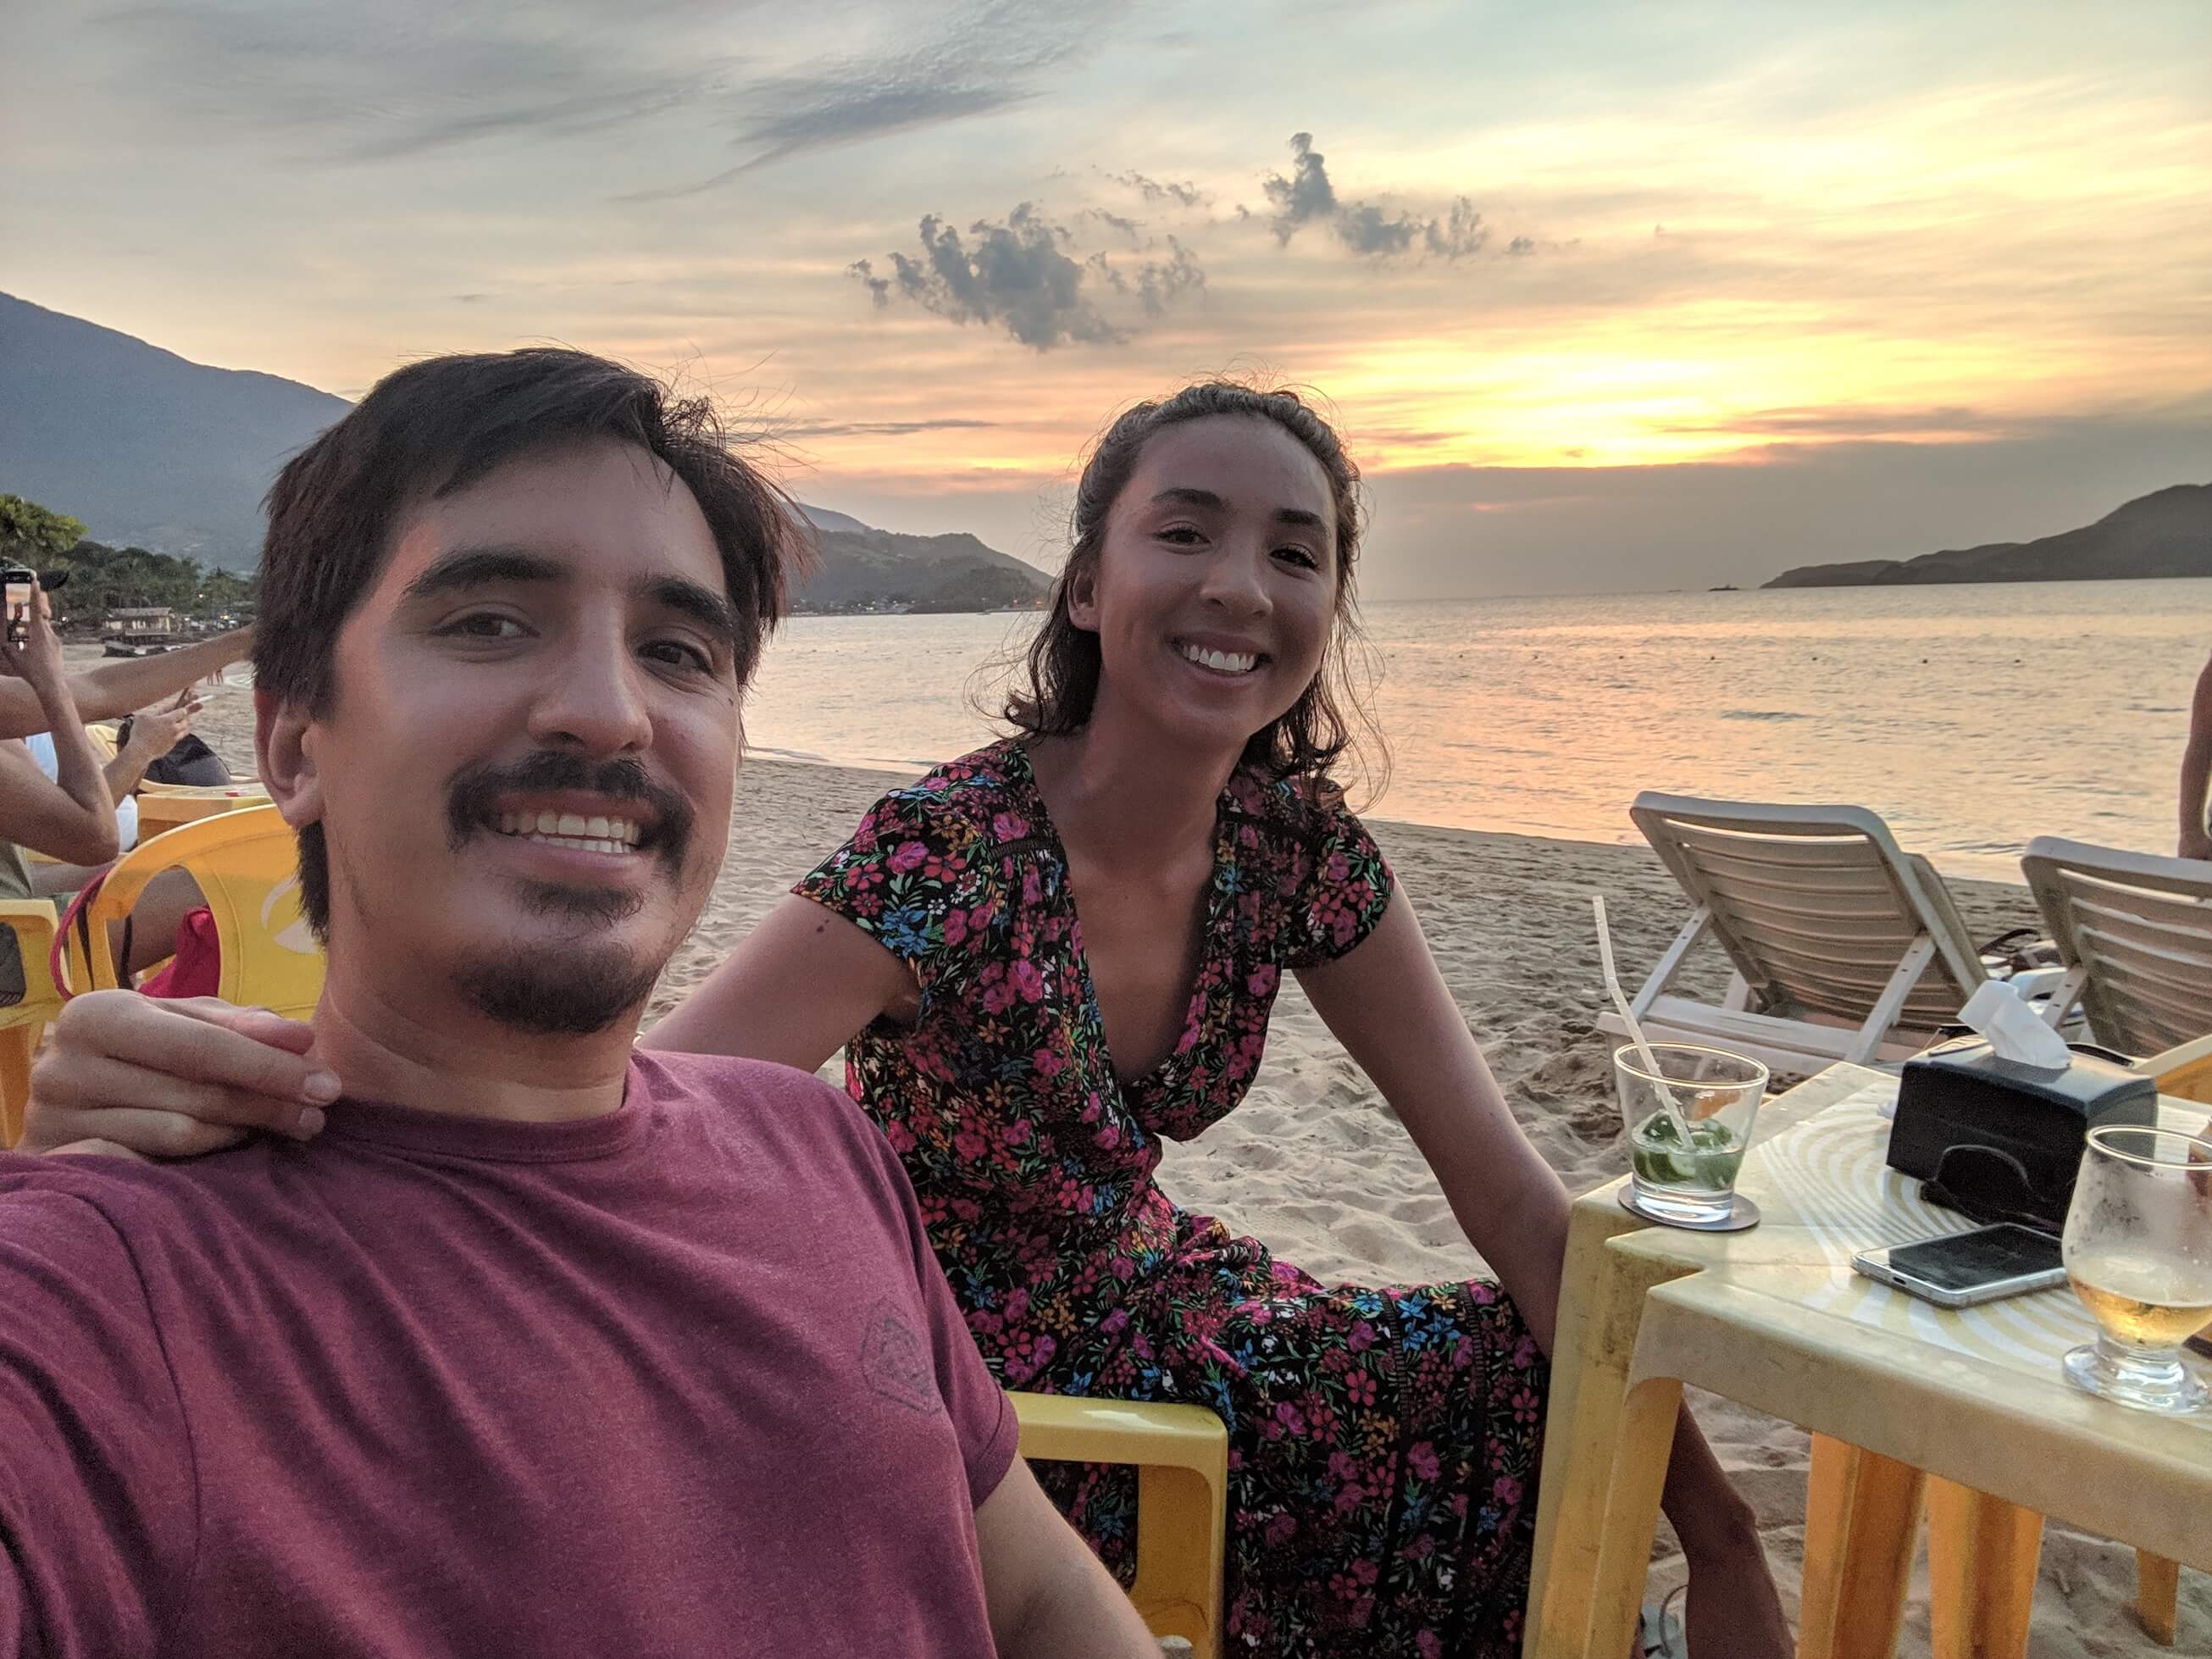 A Year Travelling Together: How We Make It Work